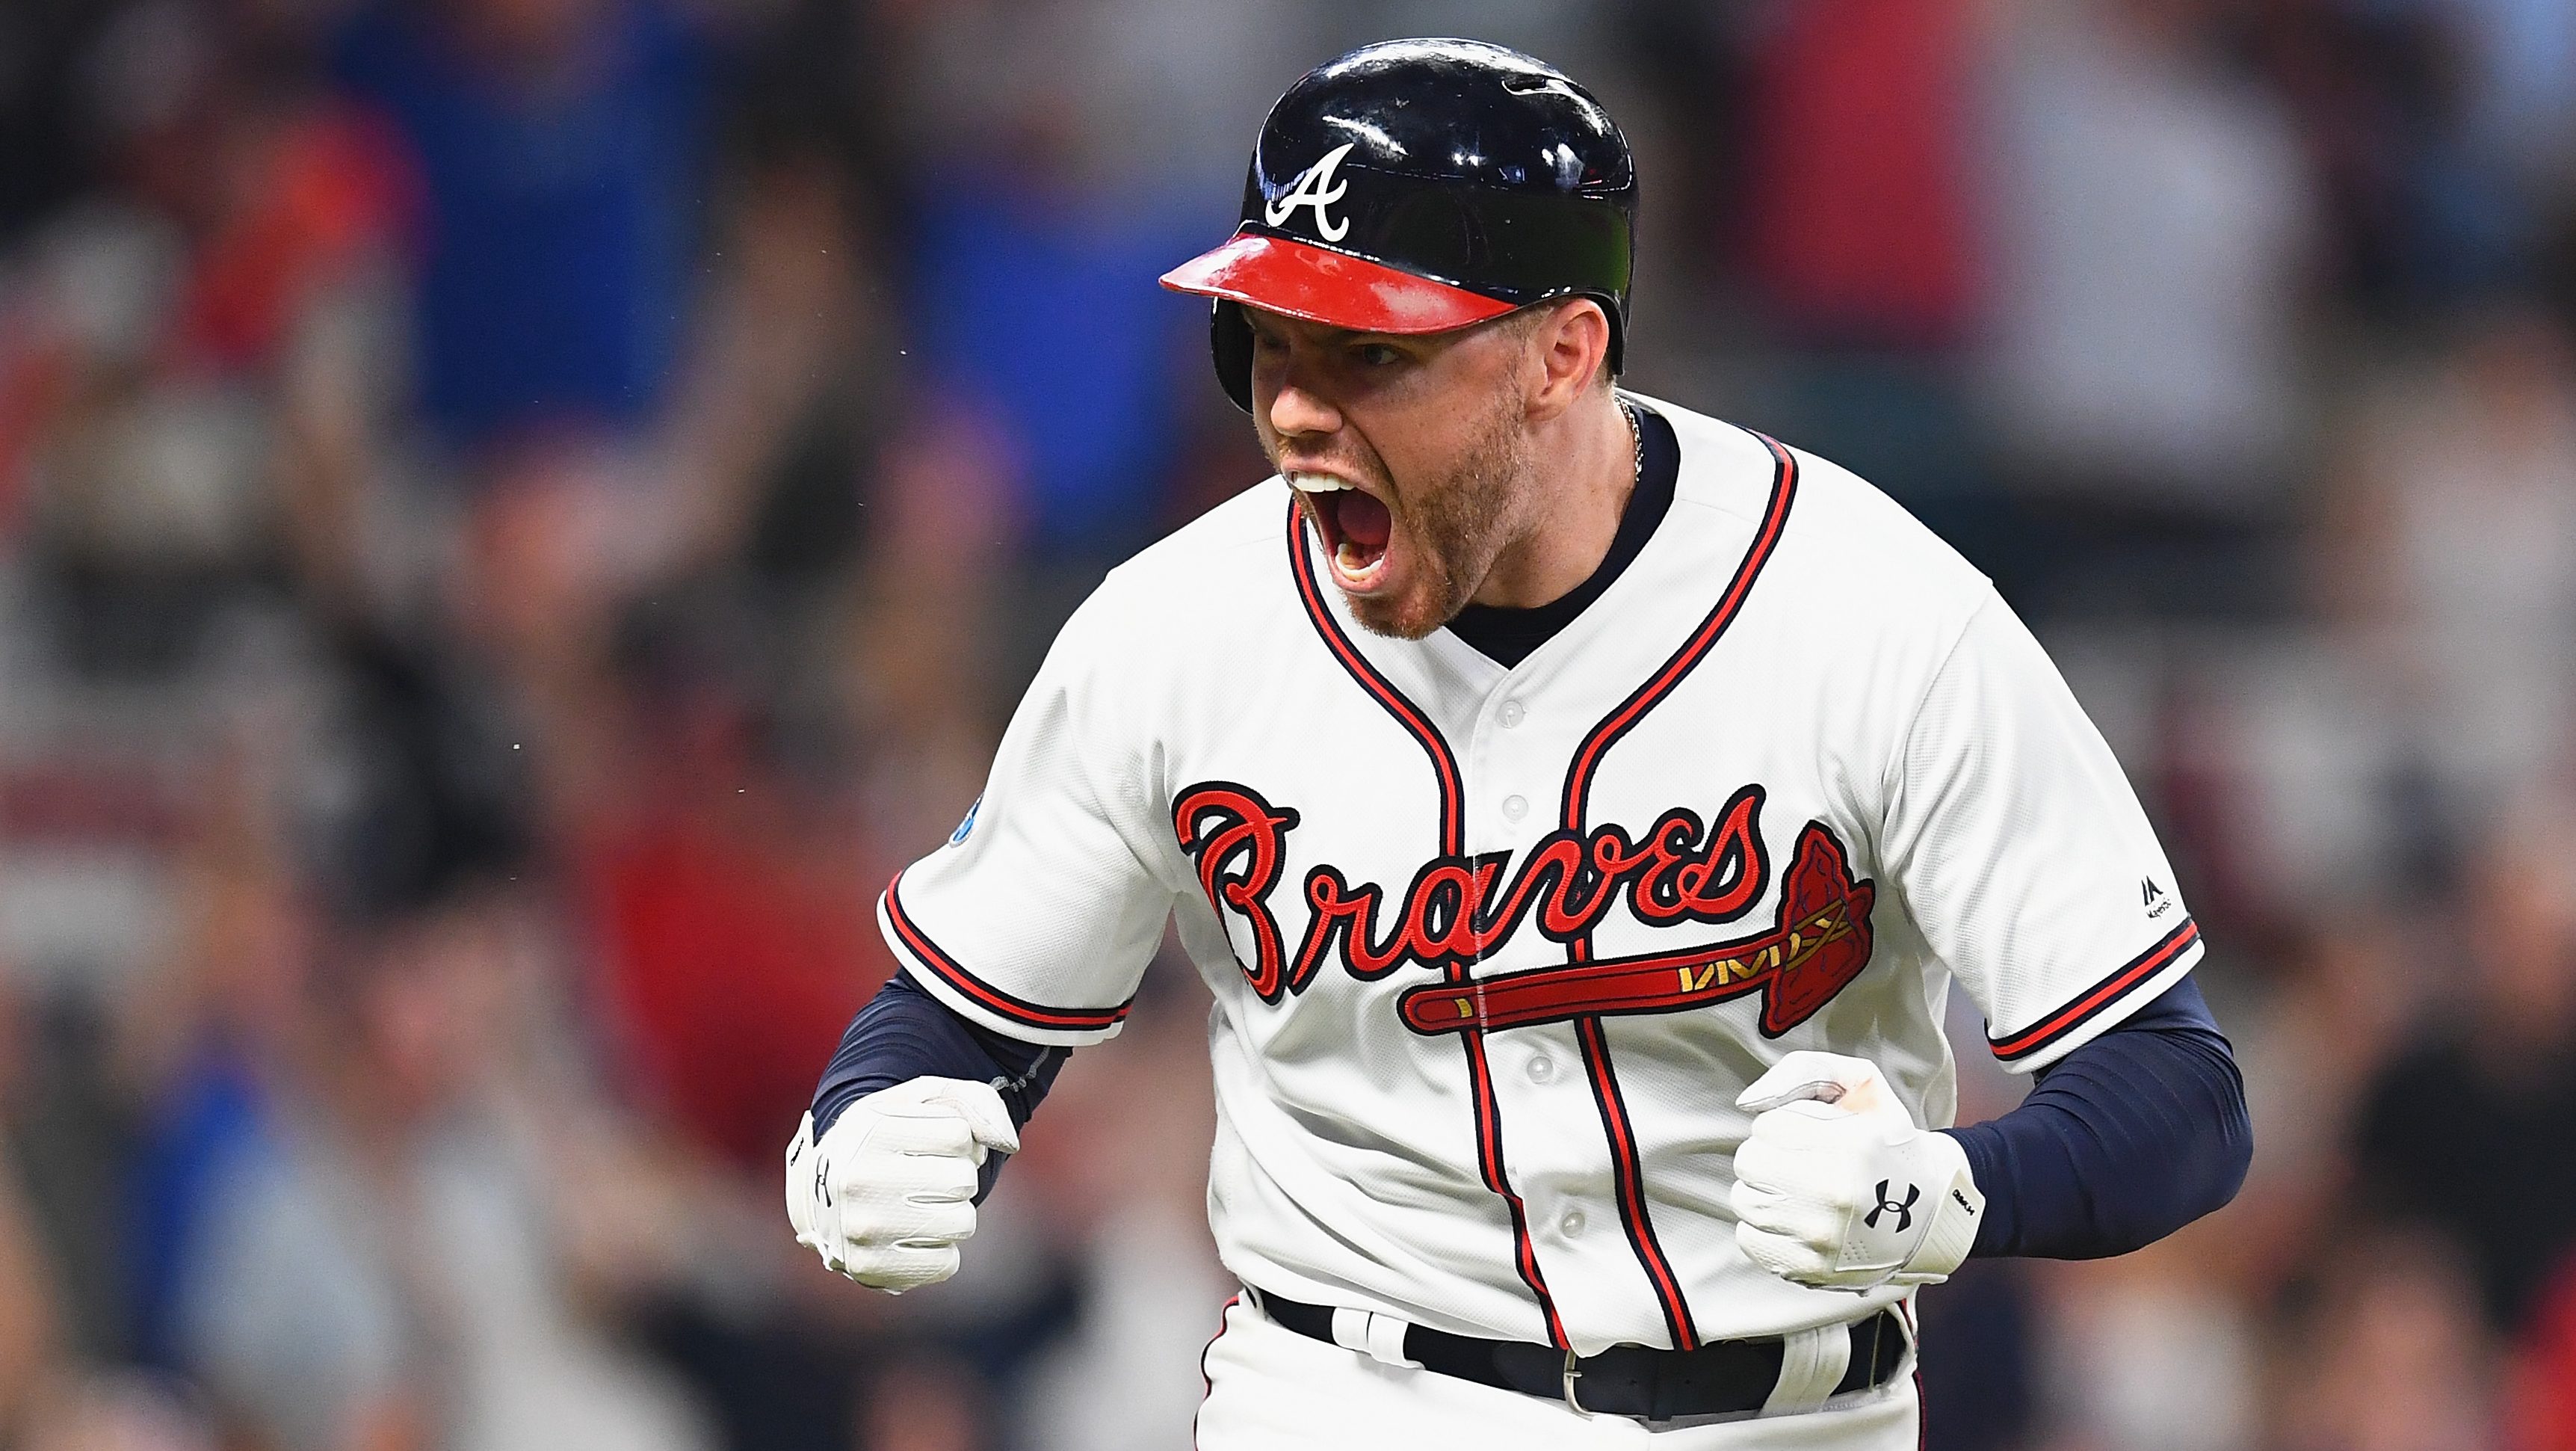 How to Watch Braves Games Online Without Cable 2021